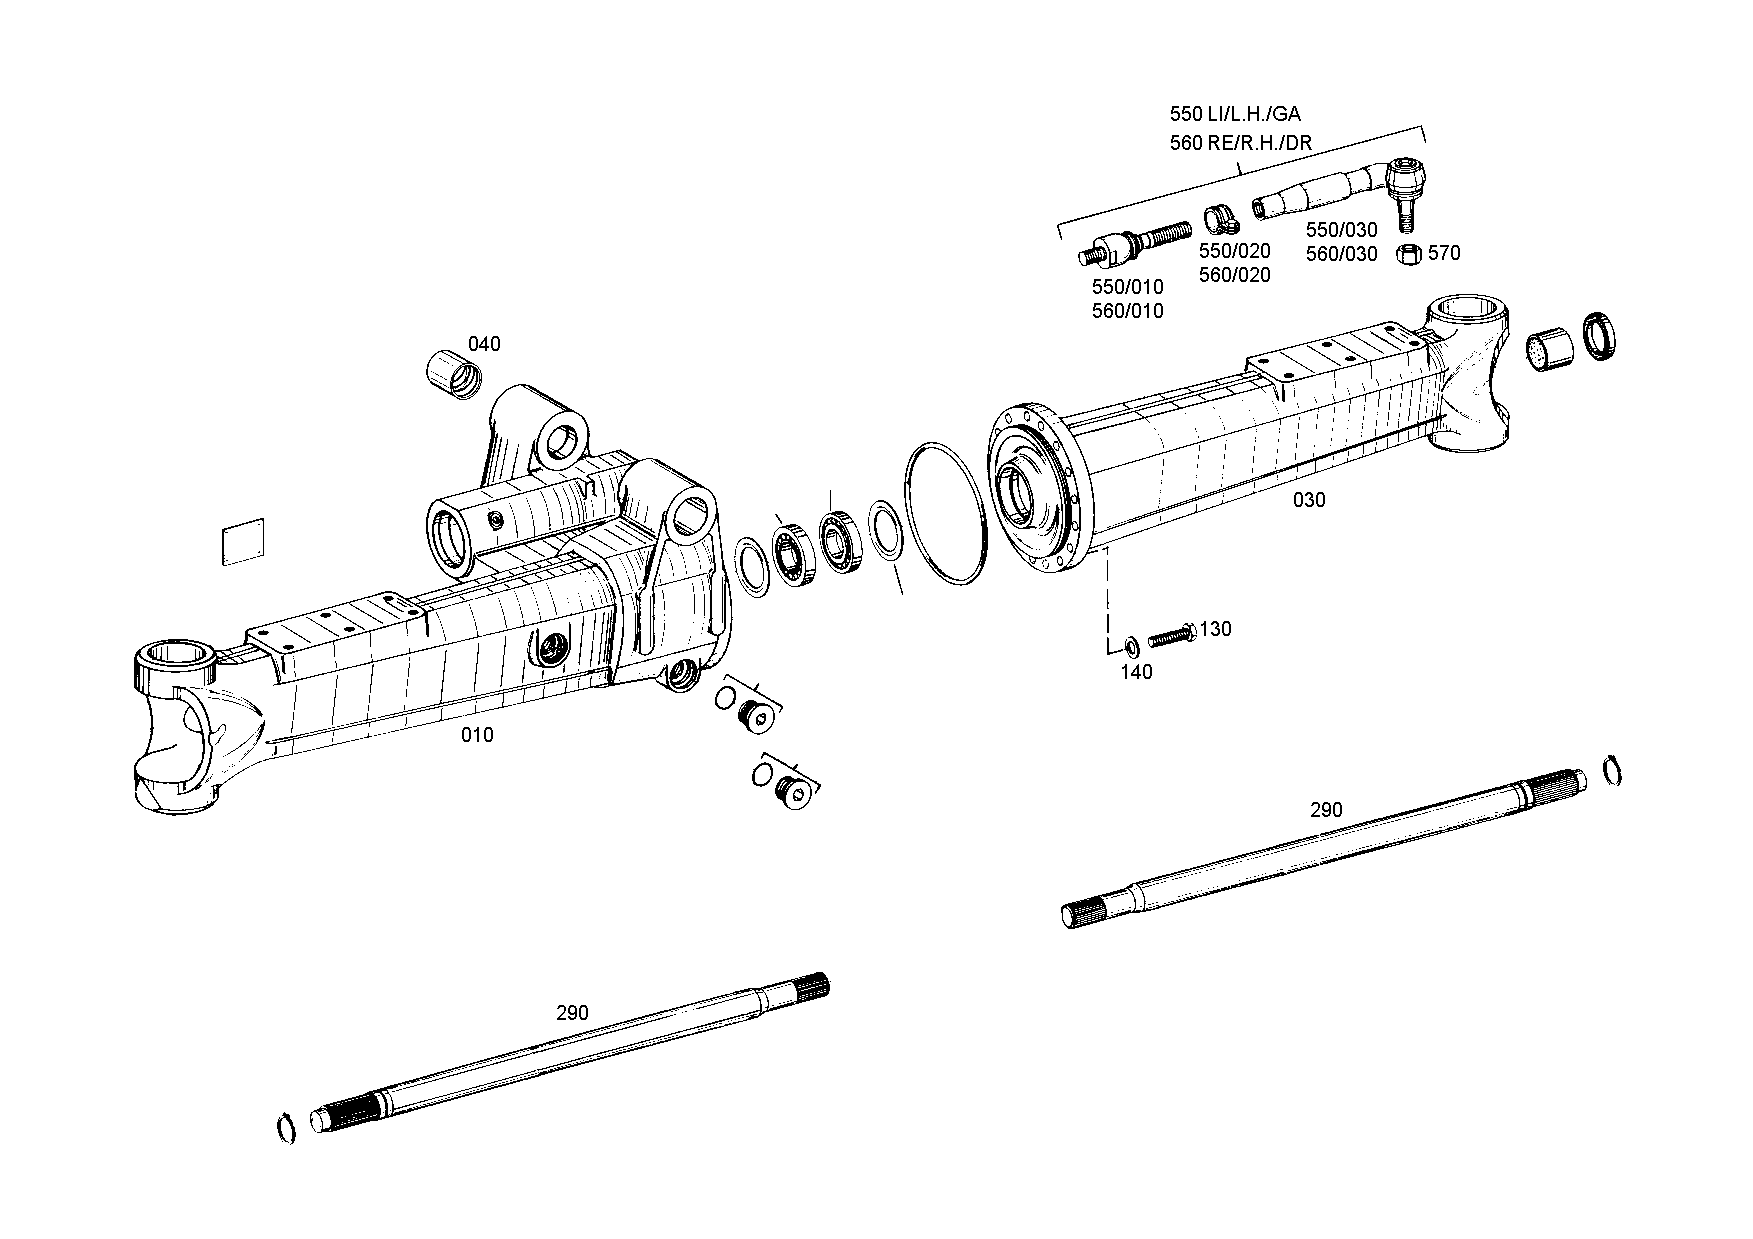 drawing for LIEBHERR GMBH 7027749 - TIE ROD (figure 2)